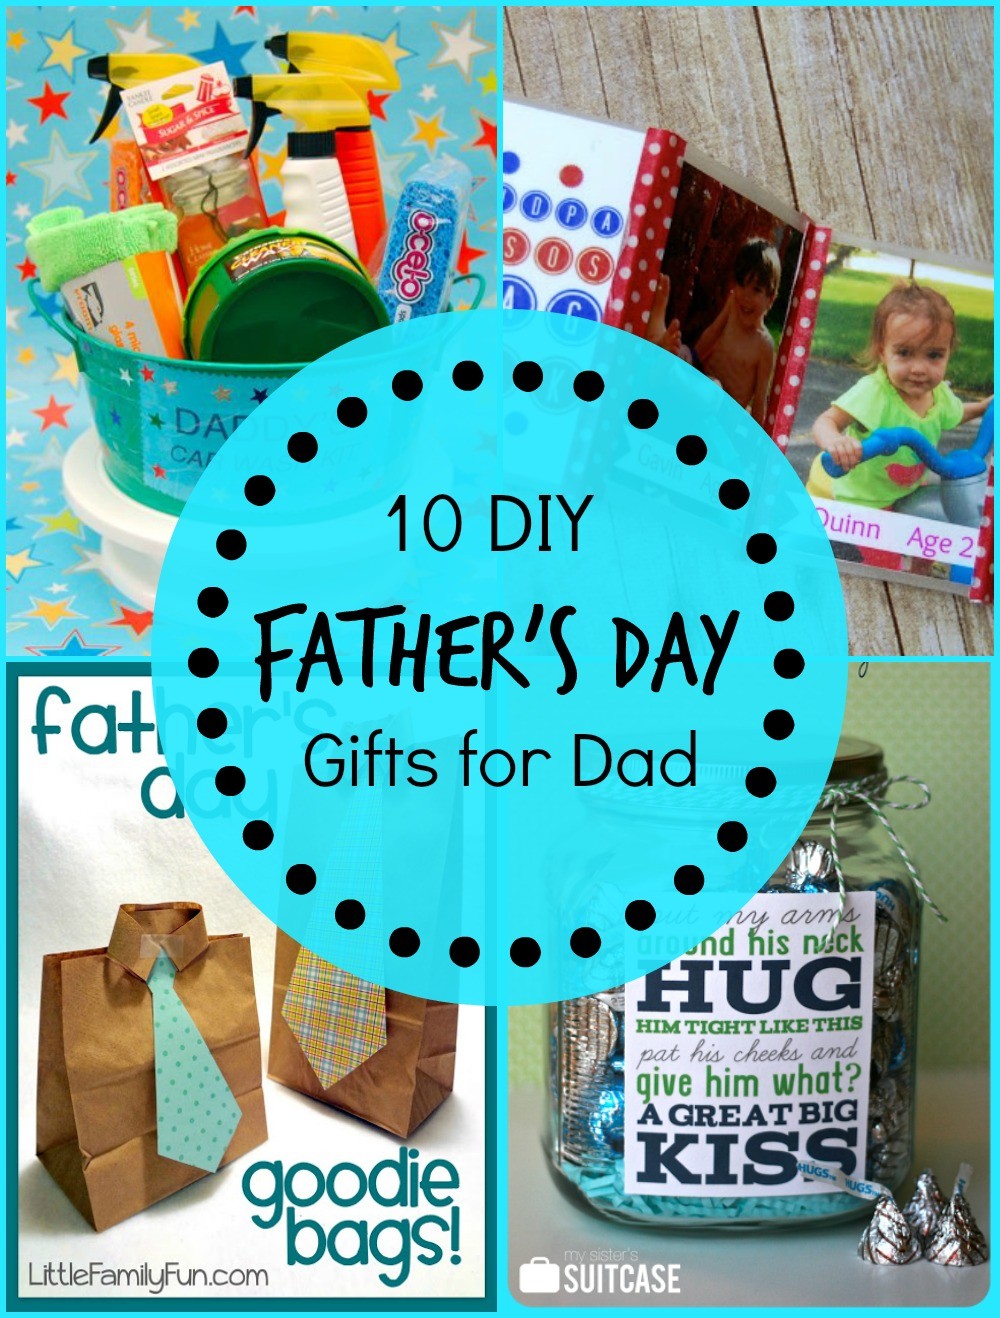 How can I make my dad's father's Day special?